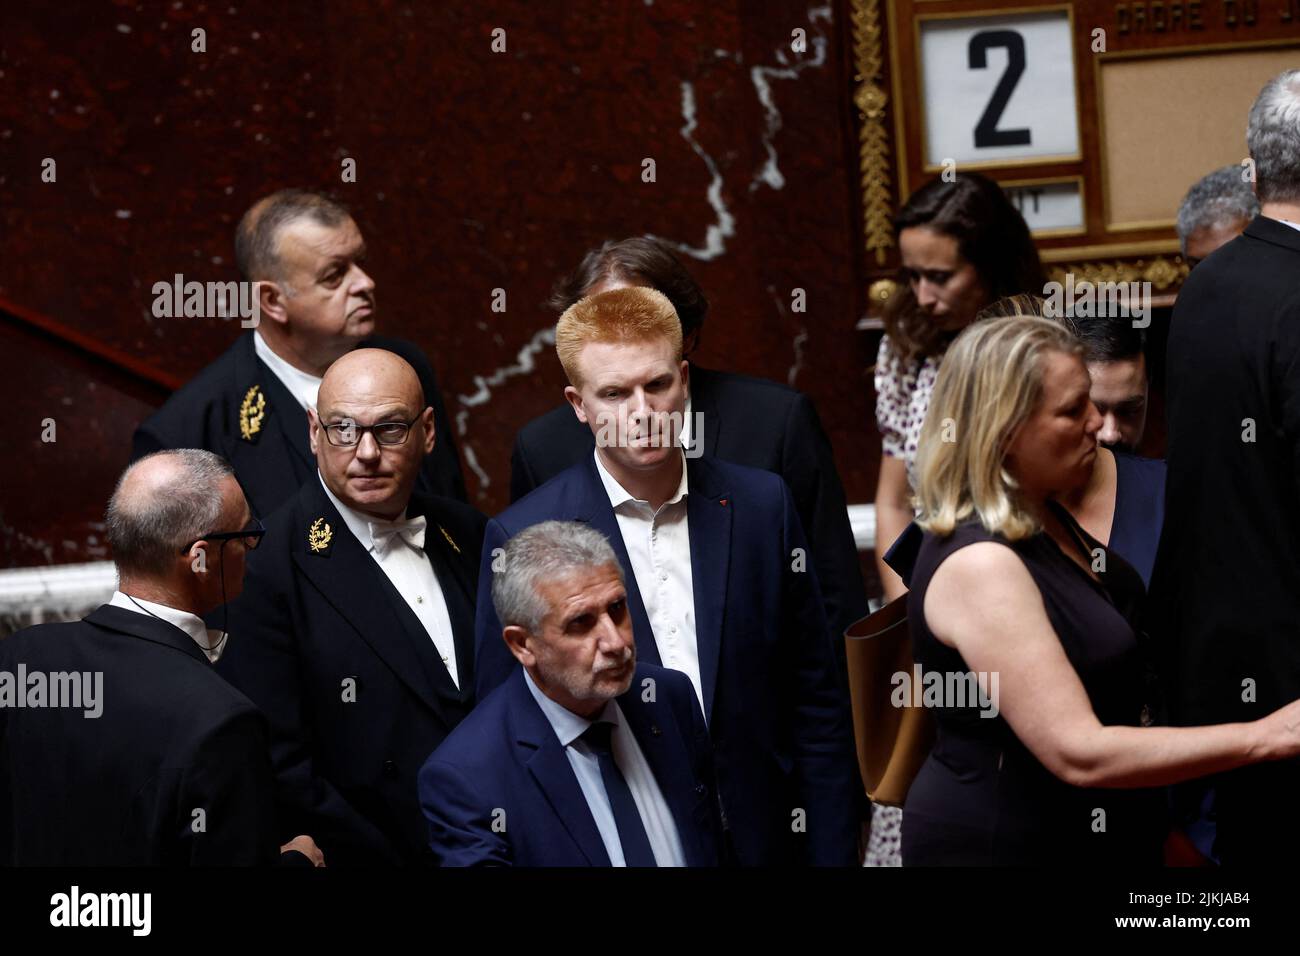 Members of parliament of French far-left opposition party La France Insoumise (France Unbowed) and the left-wing coalition NUPES, including Adrien Quatennens, come back to their seats after they left during the questions to the government session at the National Assembly in Paris, France, August 2, 2022. REUTERS/Benoit Tessier Stock Photo